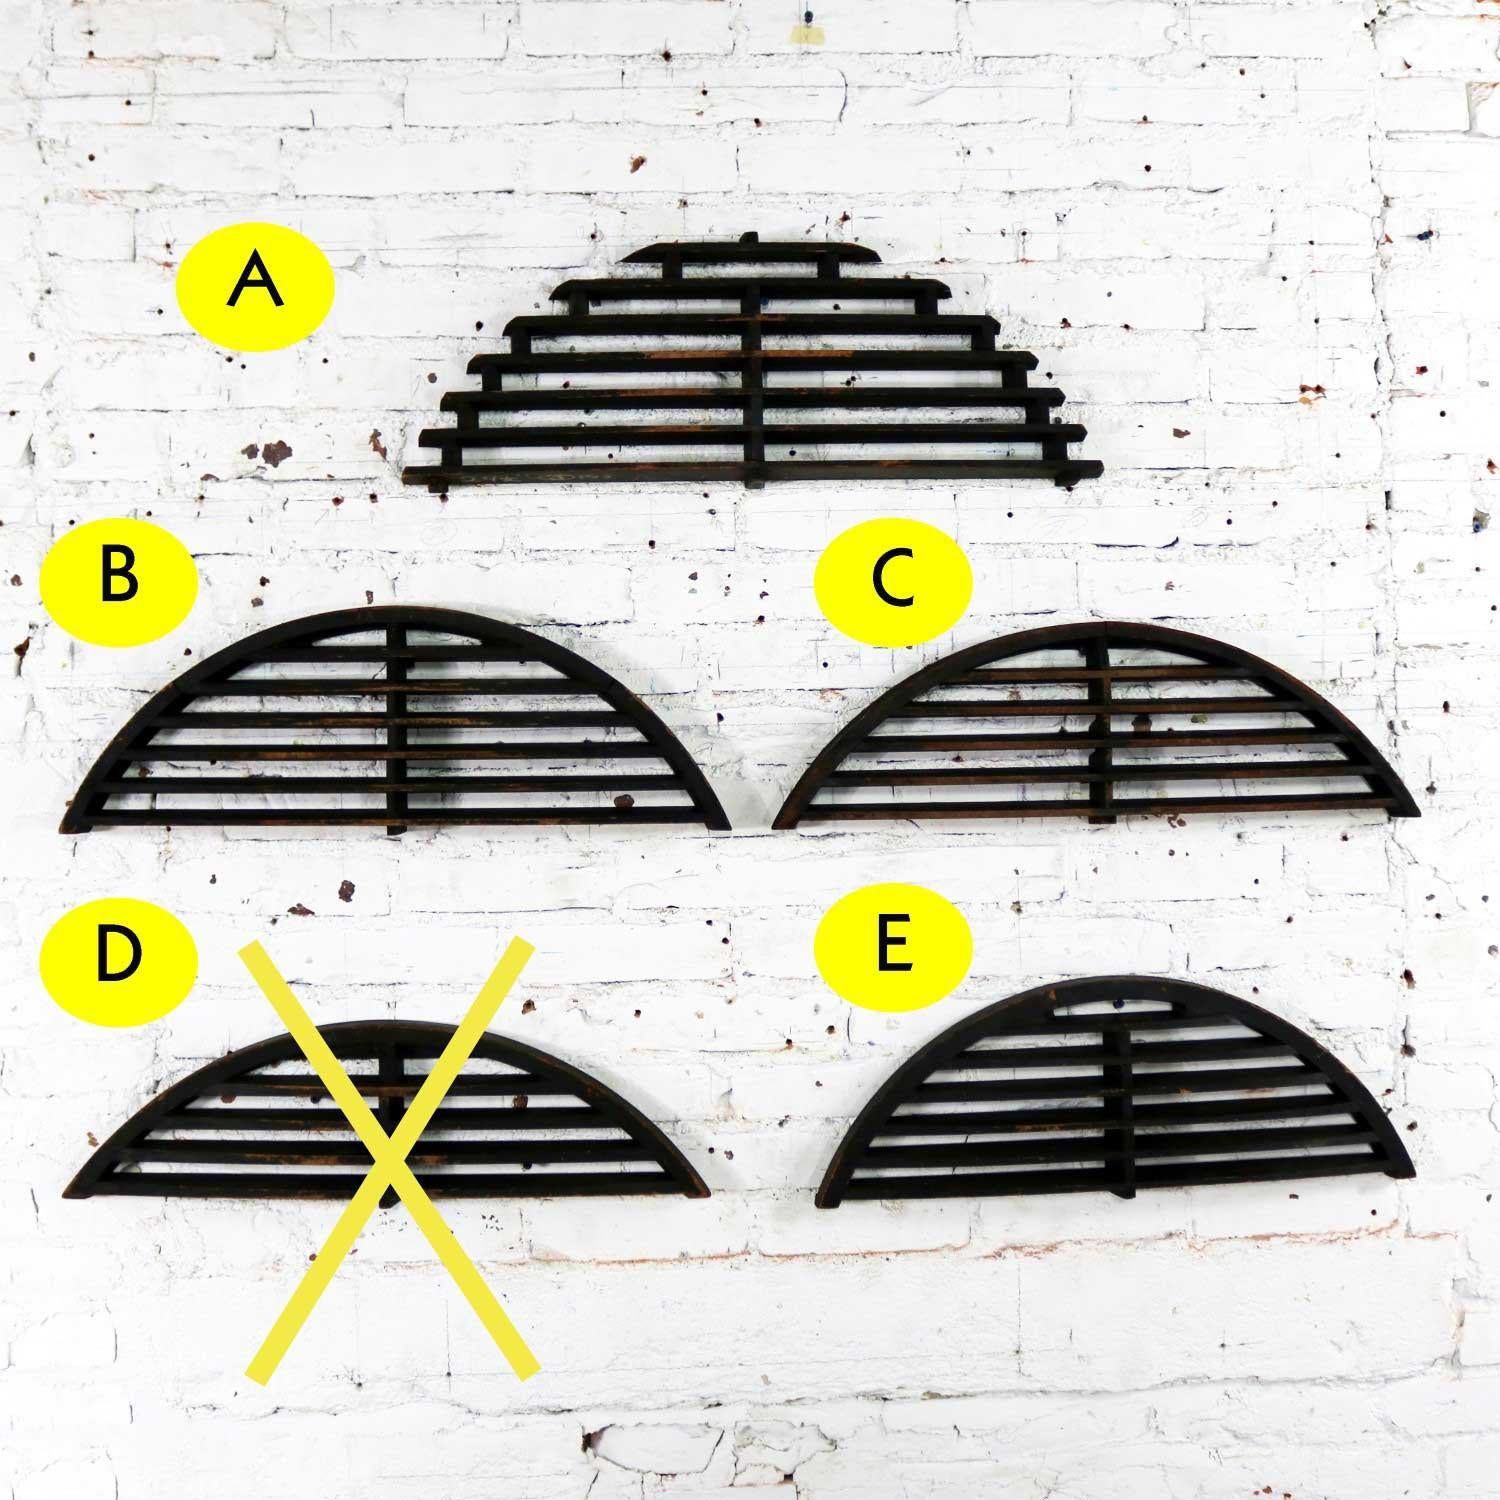 Incredible arched antique handmade wood industrial foundry patterns. These were created to make the sand cast molds for casting iron sewage grates. There are five patterns in this group, but we have priced them separately. We will sell one through